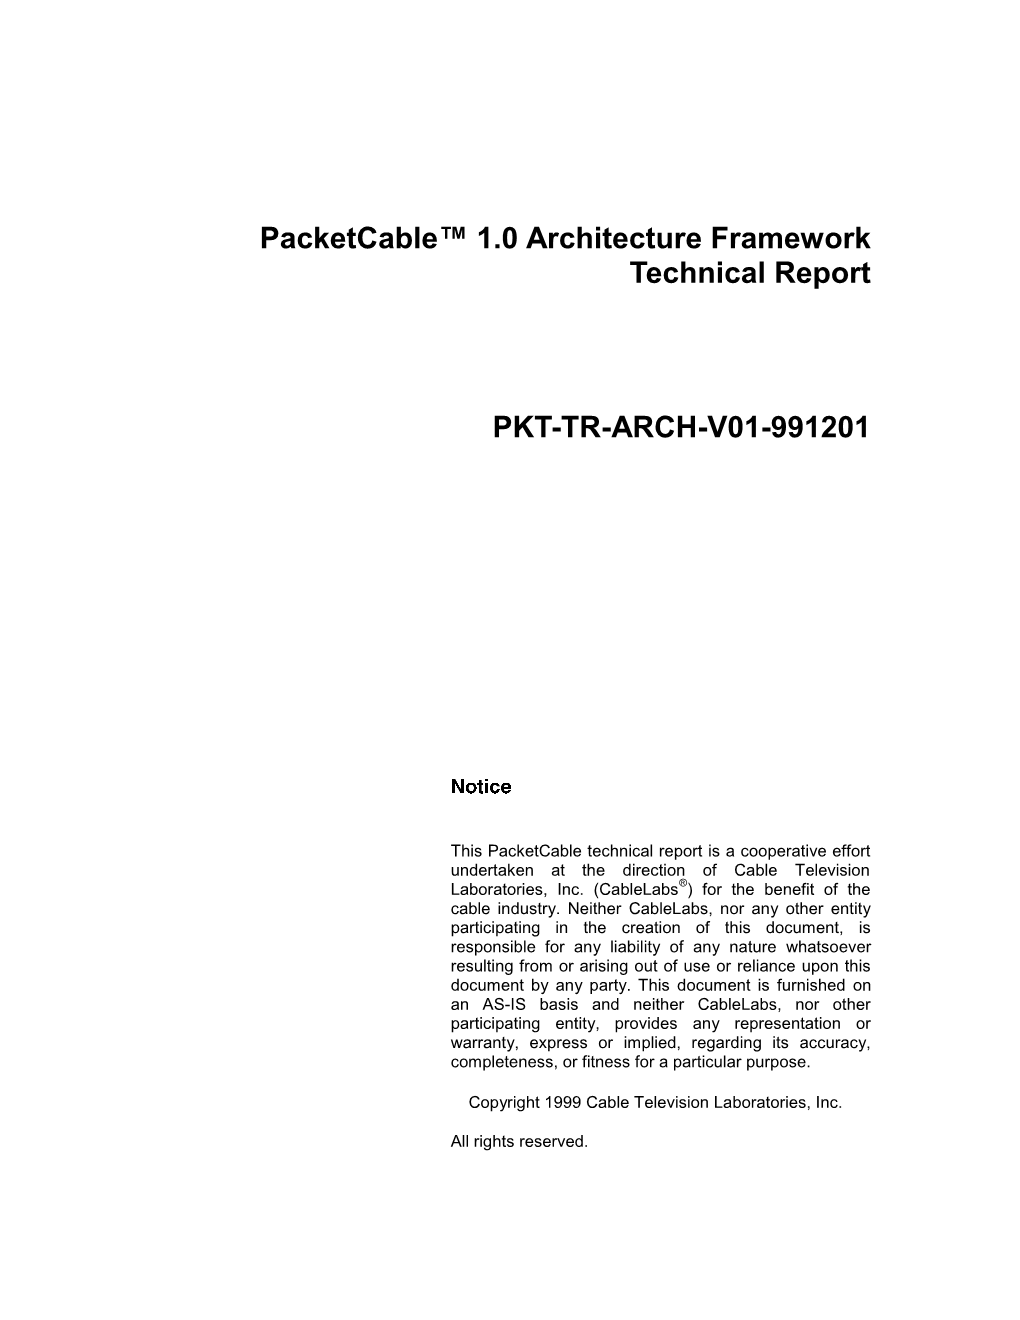 Packetcable™ 1.0 Architecture Framework Technical Report